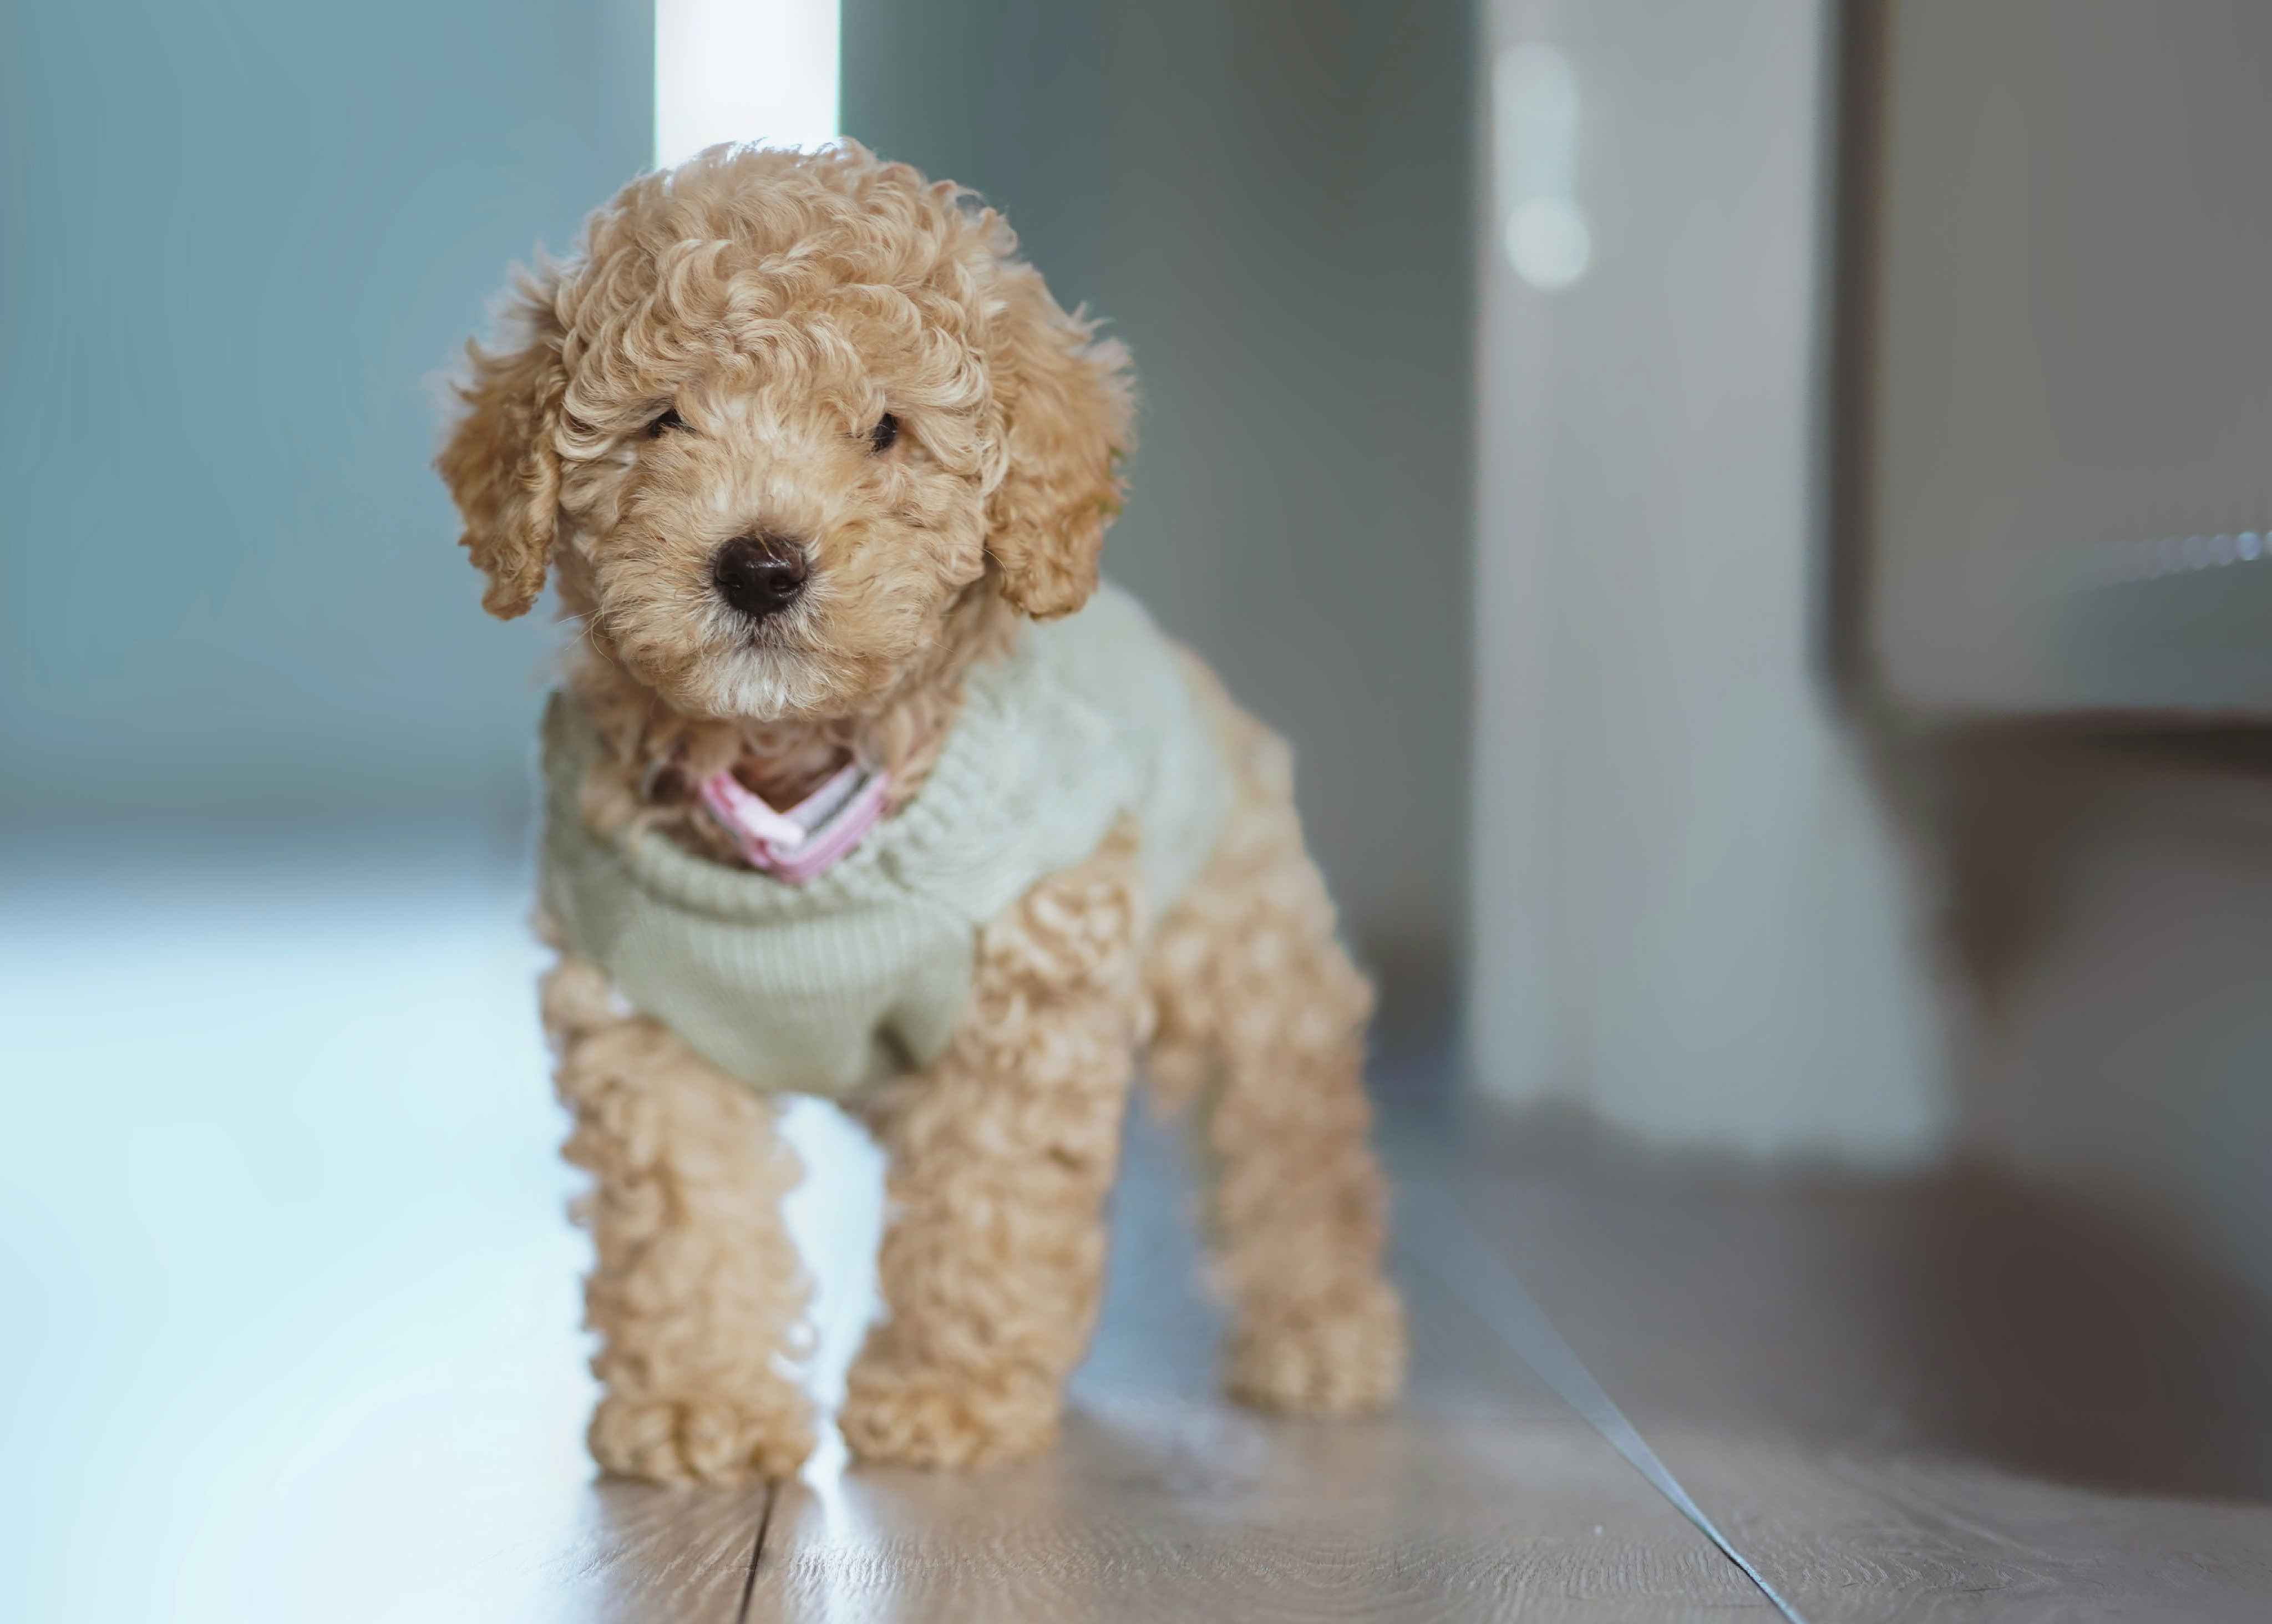 Are Poodles prone to any genetic health conditions?